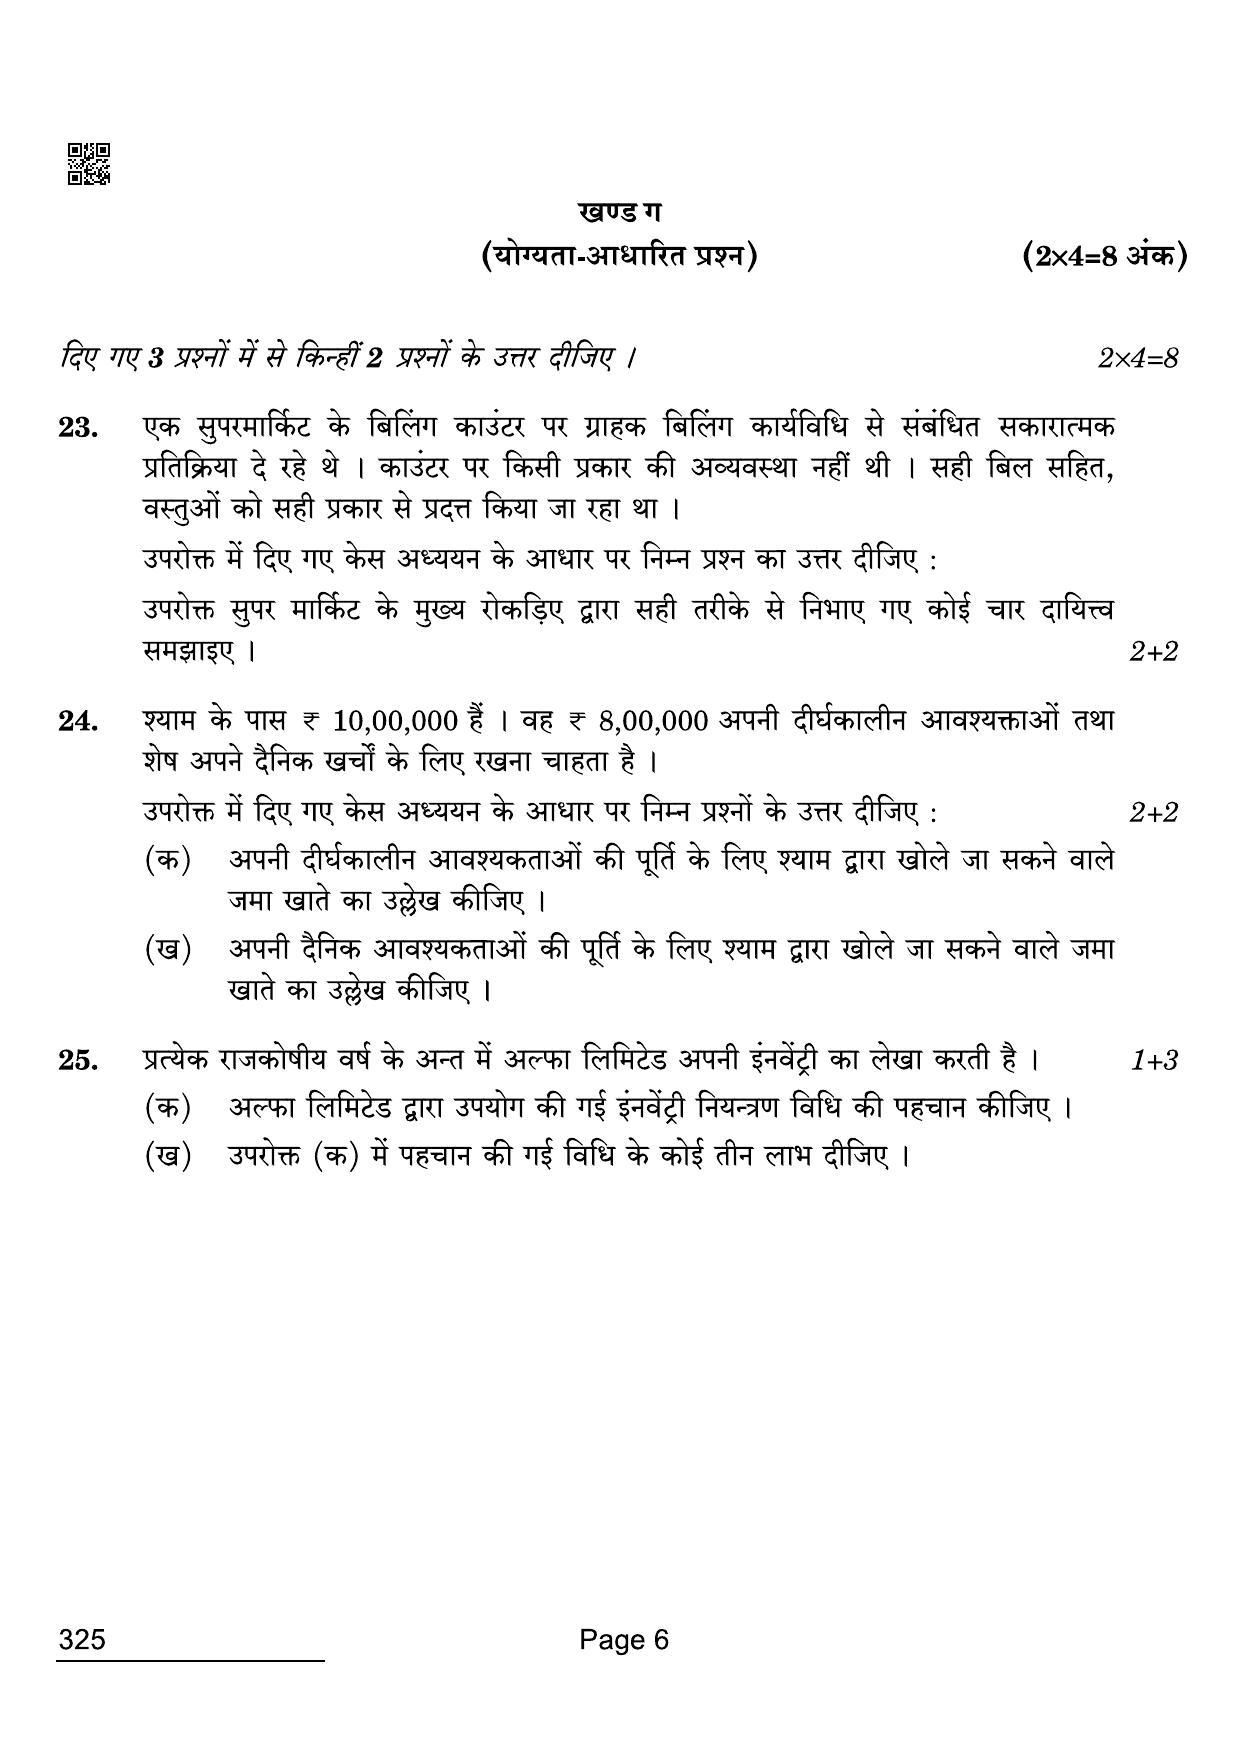 CBSE Class 12 325 Retail 2022 Compartment Question Paper - Page 6